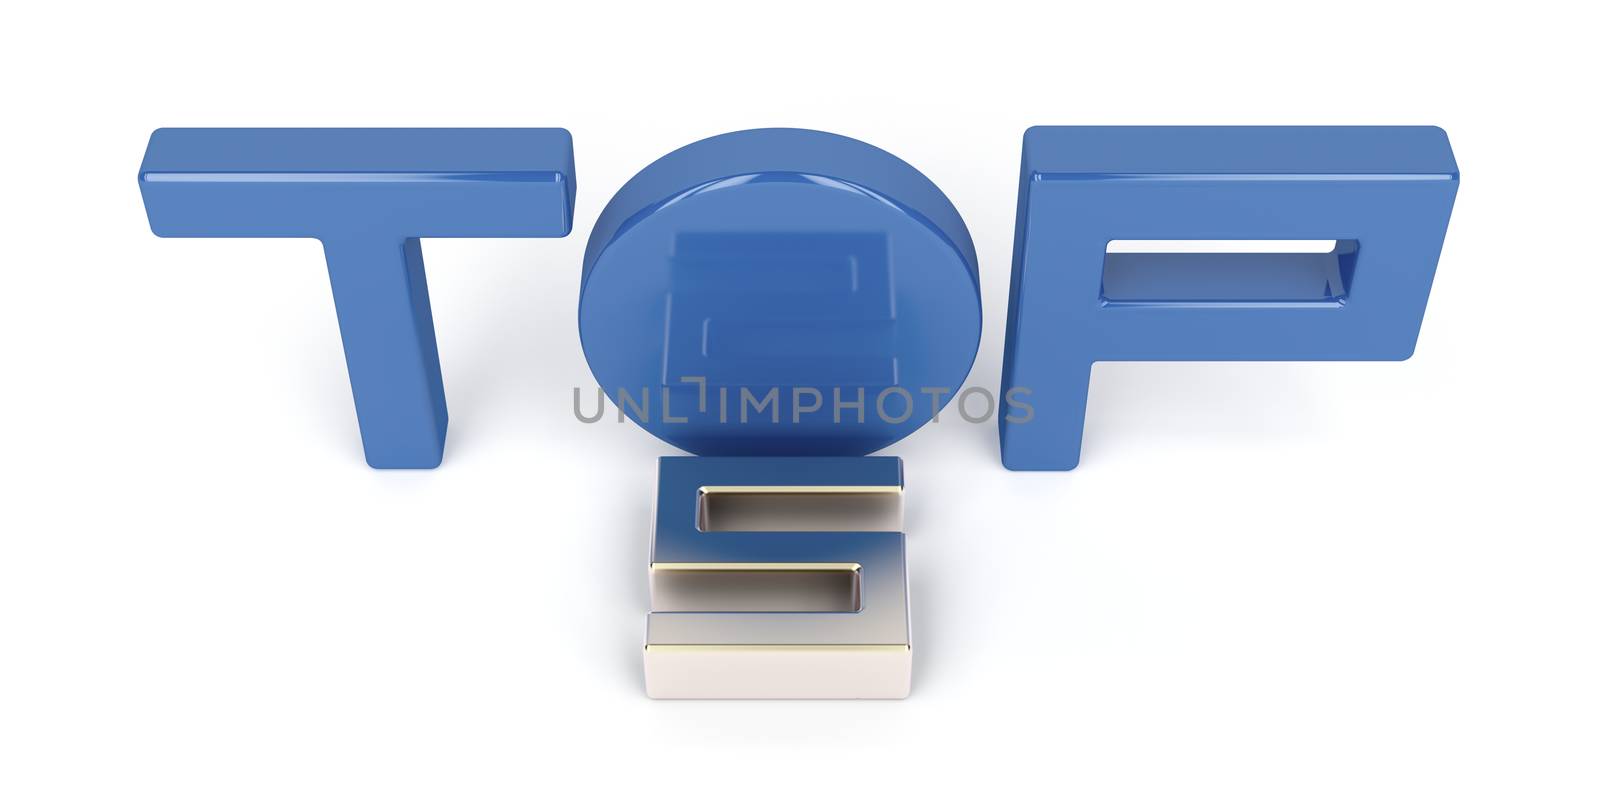 Top five, 3d illustration on white background